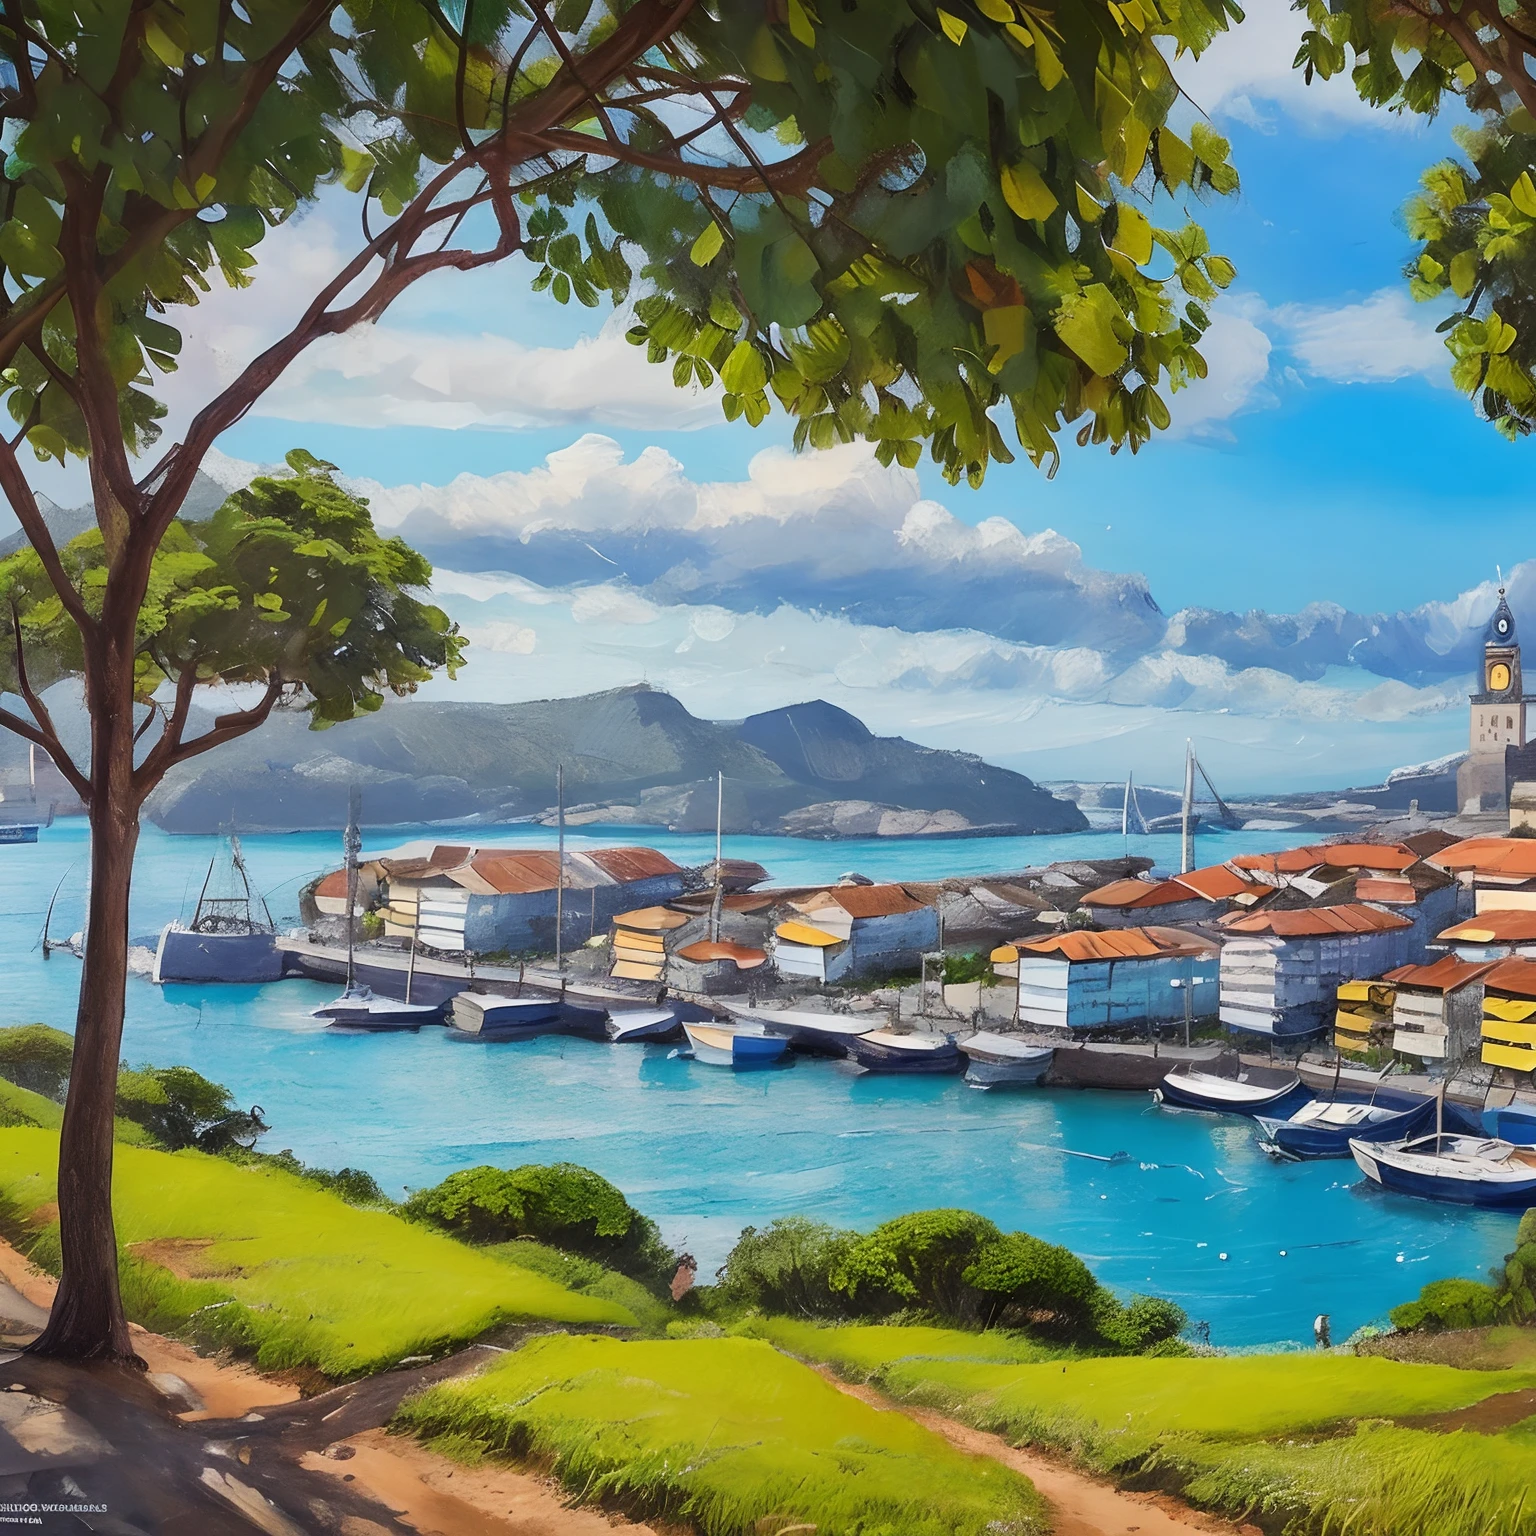 painting of a 18 Brazilian coastal town on an island, State&#39;s capital,Illustration medium,detailed cityscape,beautifully rendered sea waves,arquitetura impressionante,majestic palm trees,busy city life,Colorful market stalls,authentic local atmosphere,vivid colors,sunlit streets,glistening water,Seagulls in flight,bright blue sky,realistic city landscape,photorrealistic,high-resolution masterpiece,4k resolution,exquisite attention to detail,Unique Brazilian culture,rich history and heritage,diverse architecture,Colonial buildings,Magnificent Cathedral,Iconic lighthouse,Narrow cobbled streets, busy port, Boats docked in the harbor,pessoas alegres,residents dressed in traditional costumes,enlivening the scene with its vibrant spirit,local fishermen,Historical characters,animated street vendors,rhythmic sounds of samba,Floating market on the canal,cultural fusion of Portuguese and indigenous influences,amazing view from the point of view,Mood change in the sky and ocean,Romantic sunset over the city,soft, warm light illuminating the landscape,mix of old and new,modern skyscrapers that merge with historic buildings,Majestic statue welcoming visitors at the entrance to the city，Impressive mix of nature and urbanization,inspiring environment,unforgettable experience.